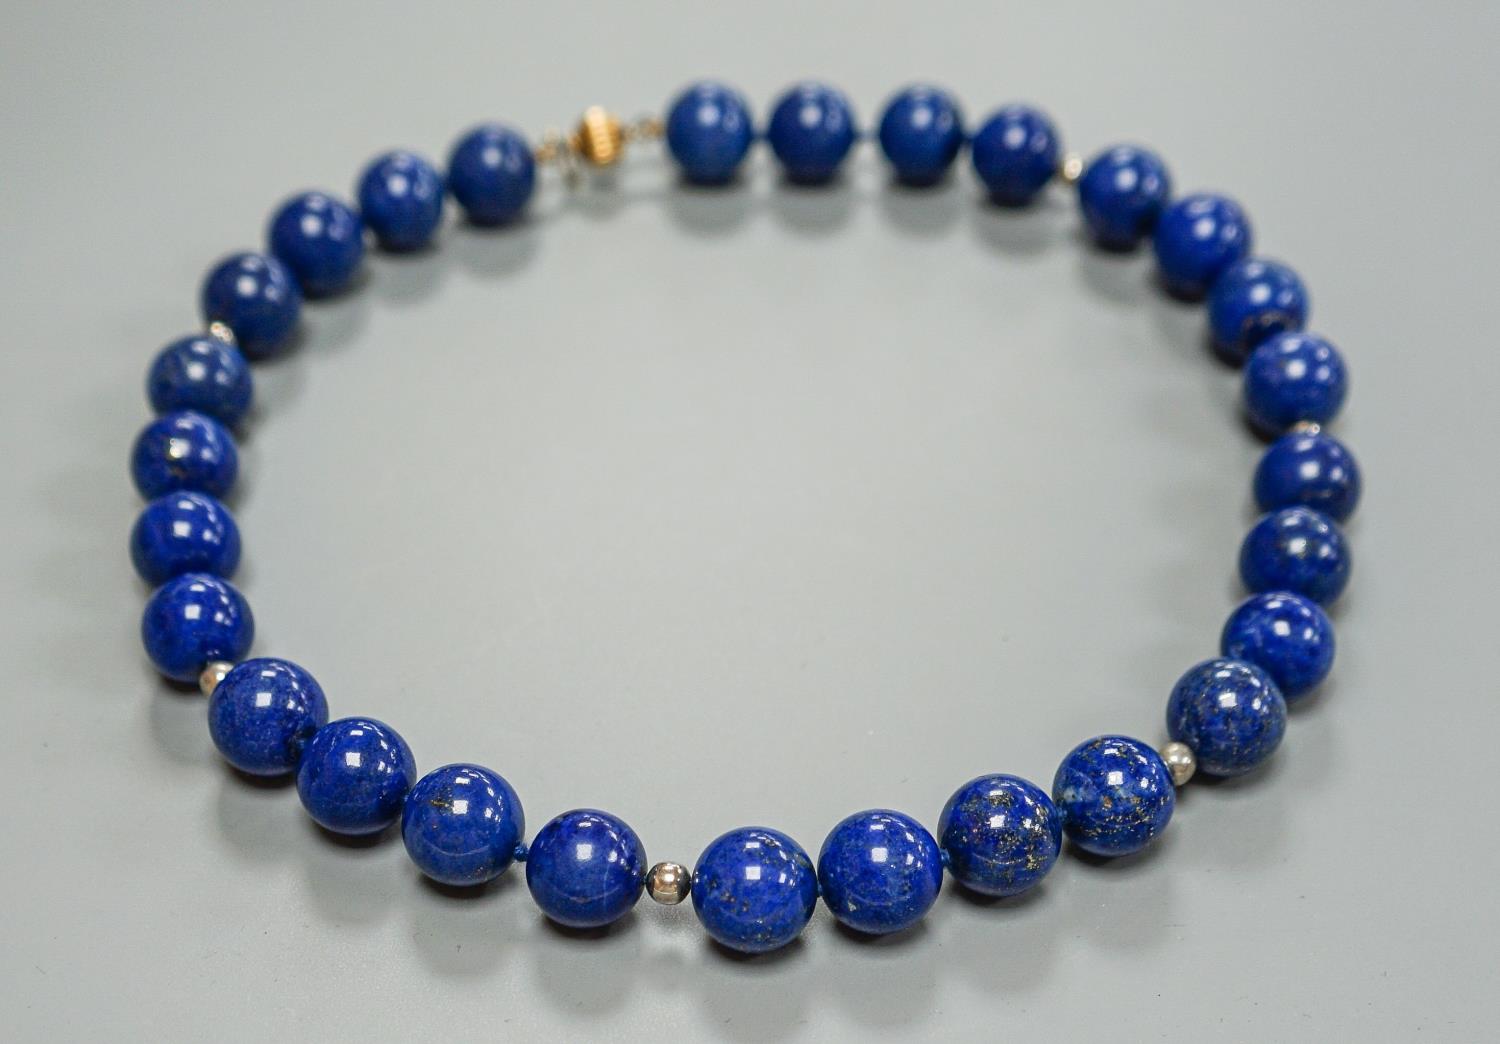 A single strand lapis lazuli circular bead necklace, with 375 clasp, 44cm. - Image 3 of 3